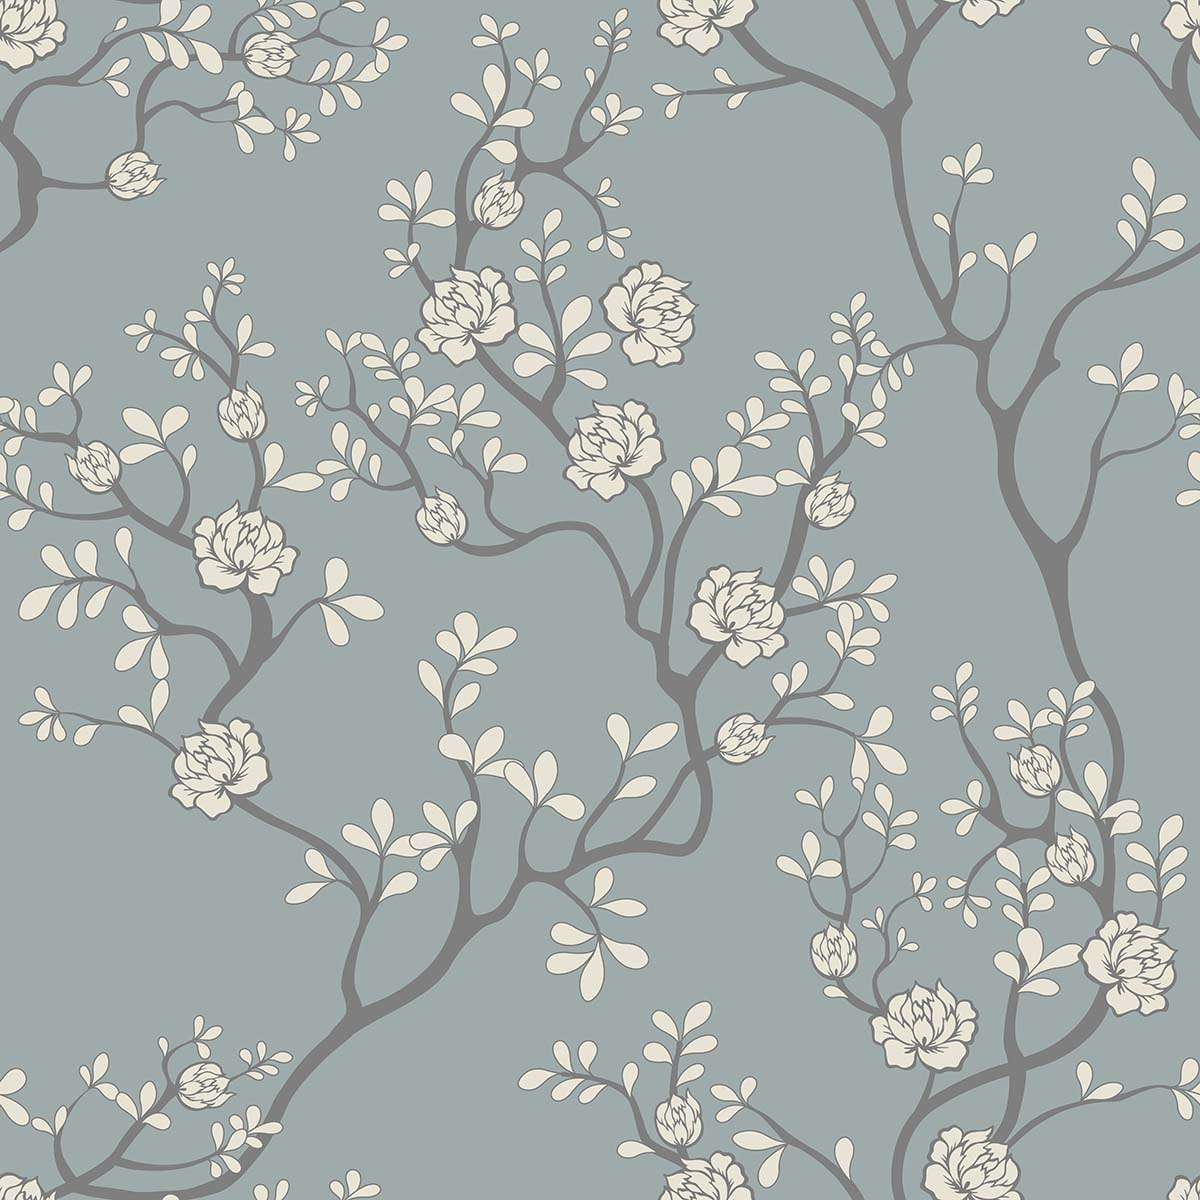 A pattern of white flowers on a blue background